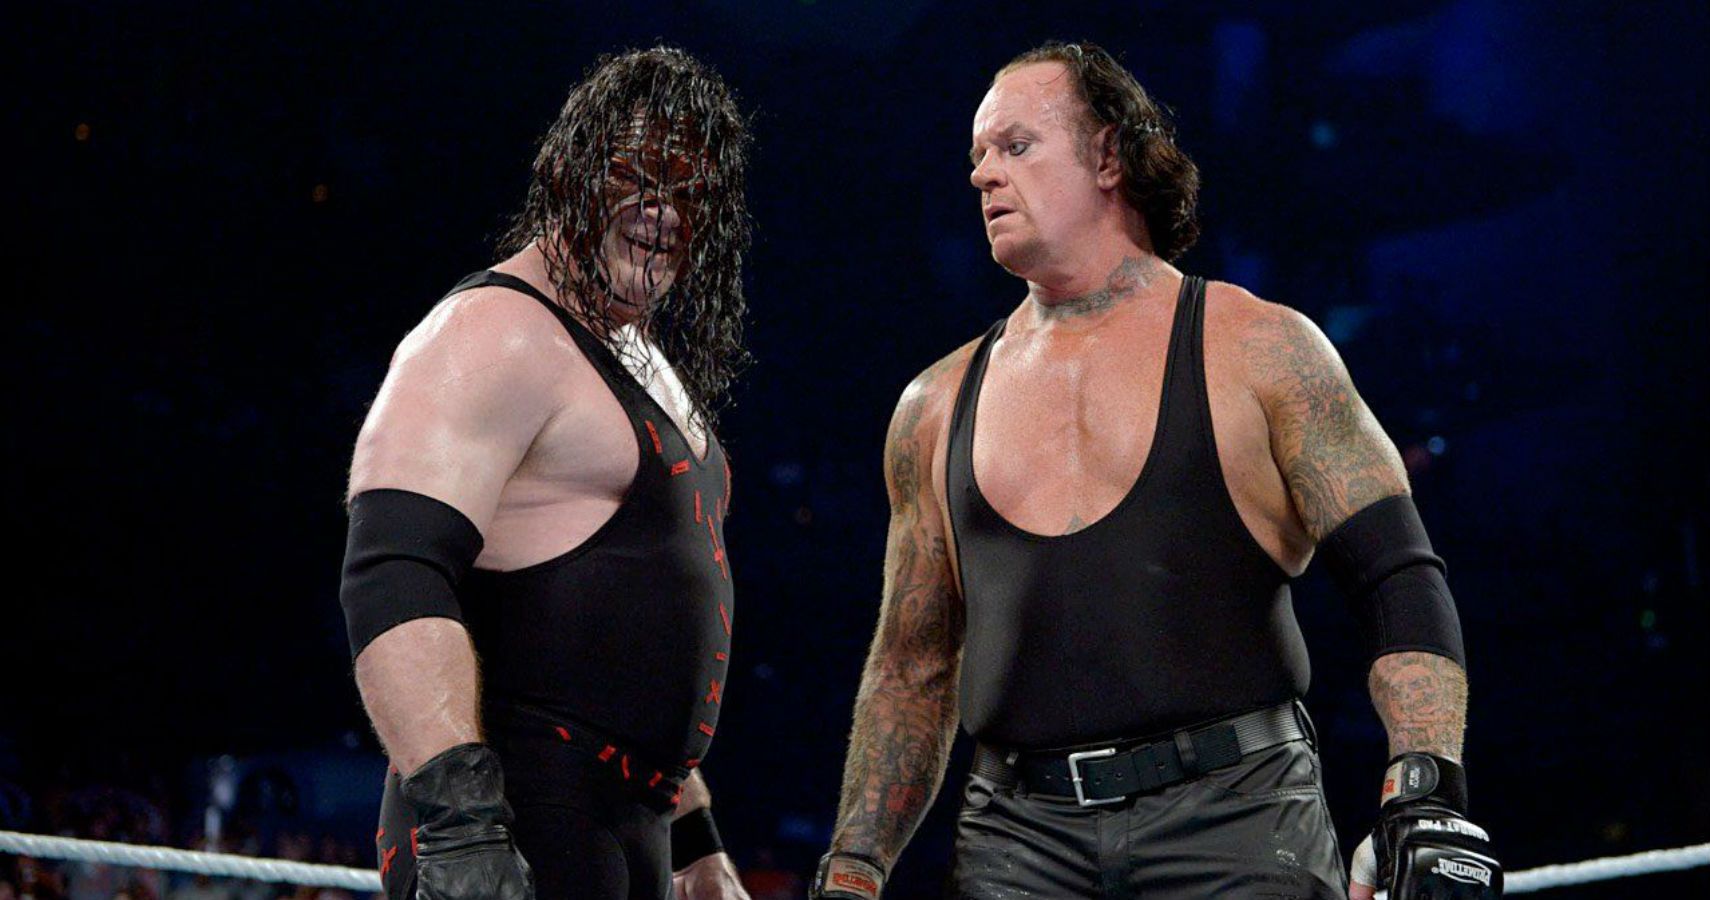 Undertaker And Kane Reuniting Outside Of WWE For First Time Ever